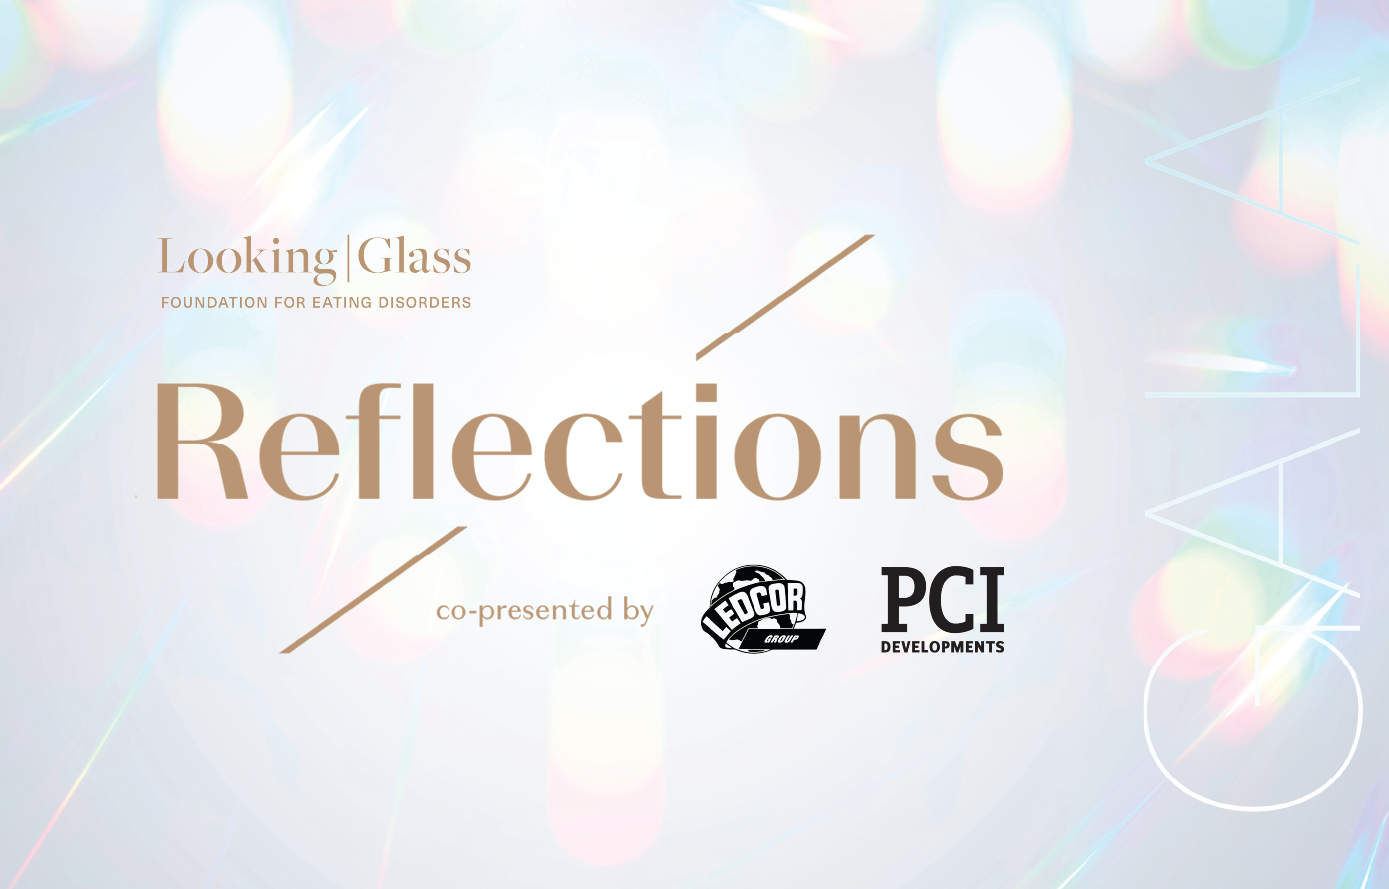 Looking Glass' Reflections Gala co-presented by Ledcor and PCI Developments